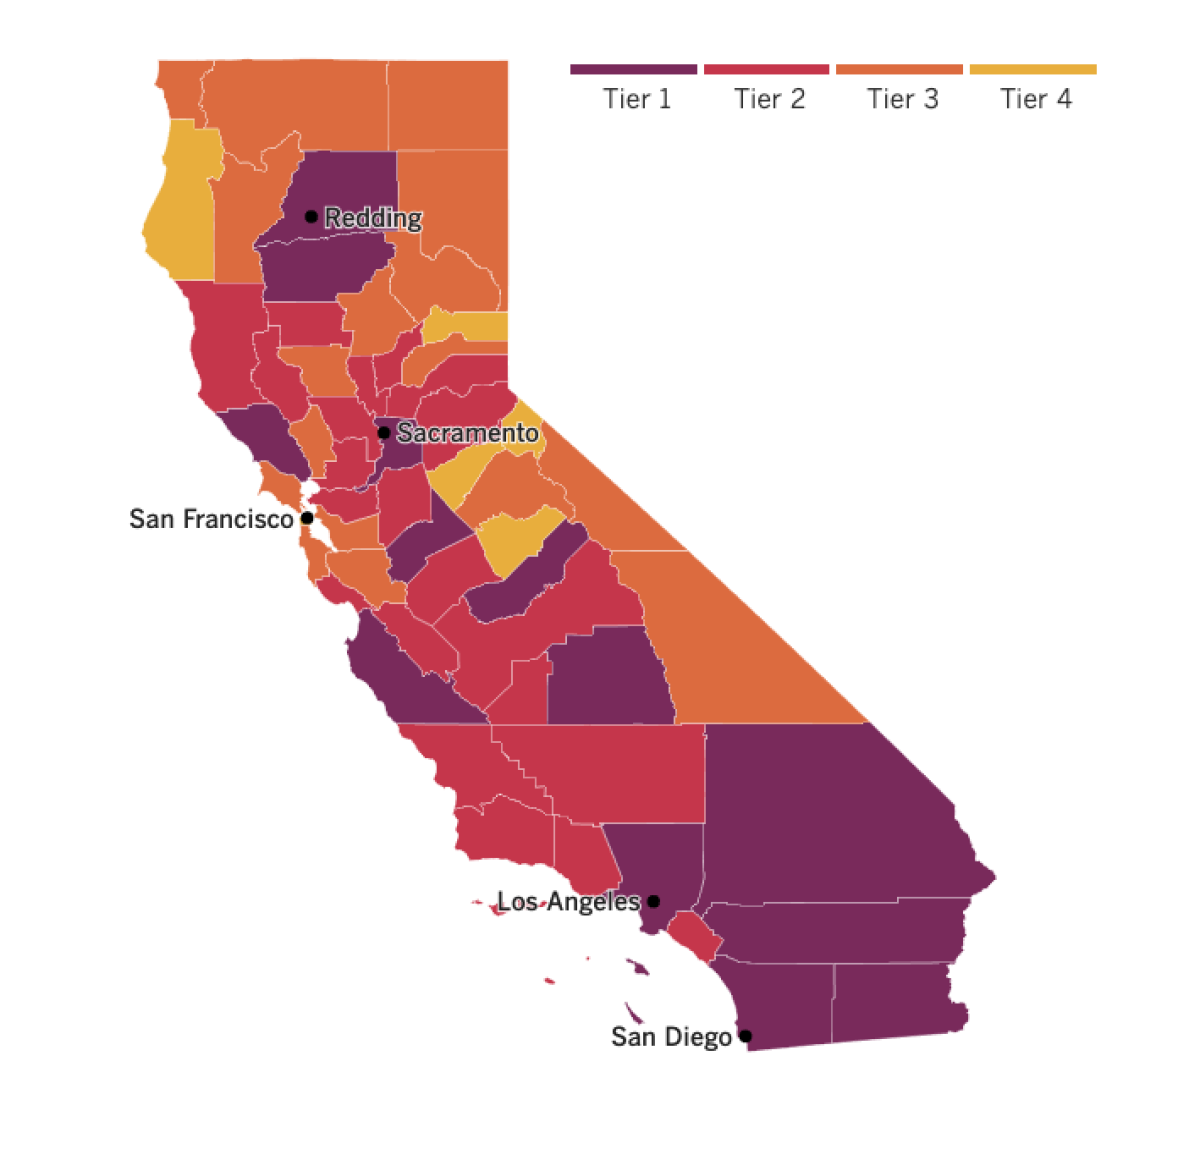 A map of California showing the tiers to which counties have been assigned based on their local levels of coronavirus risk.